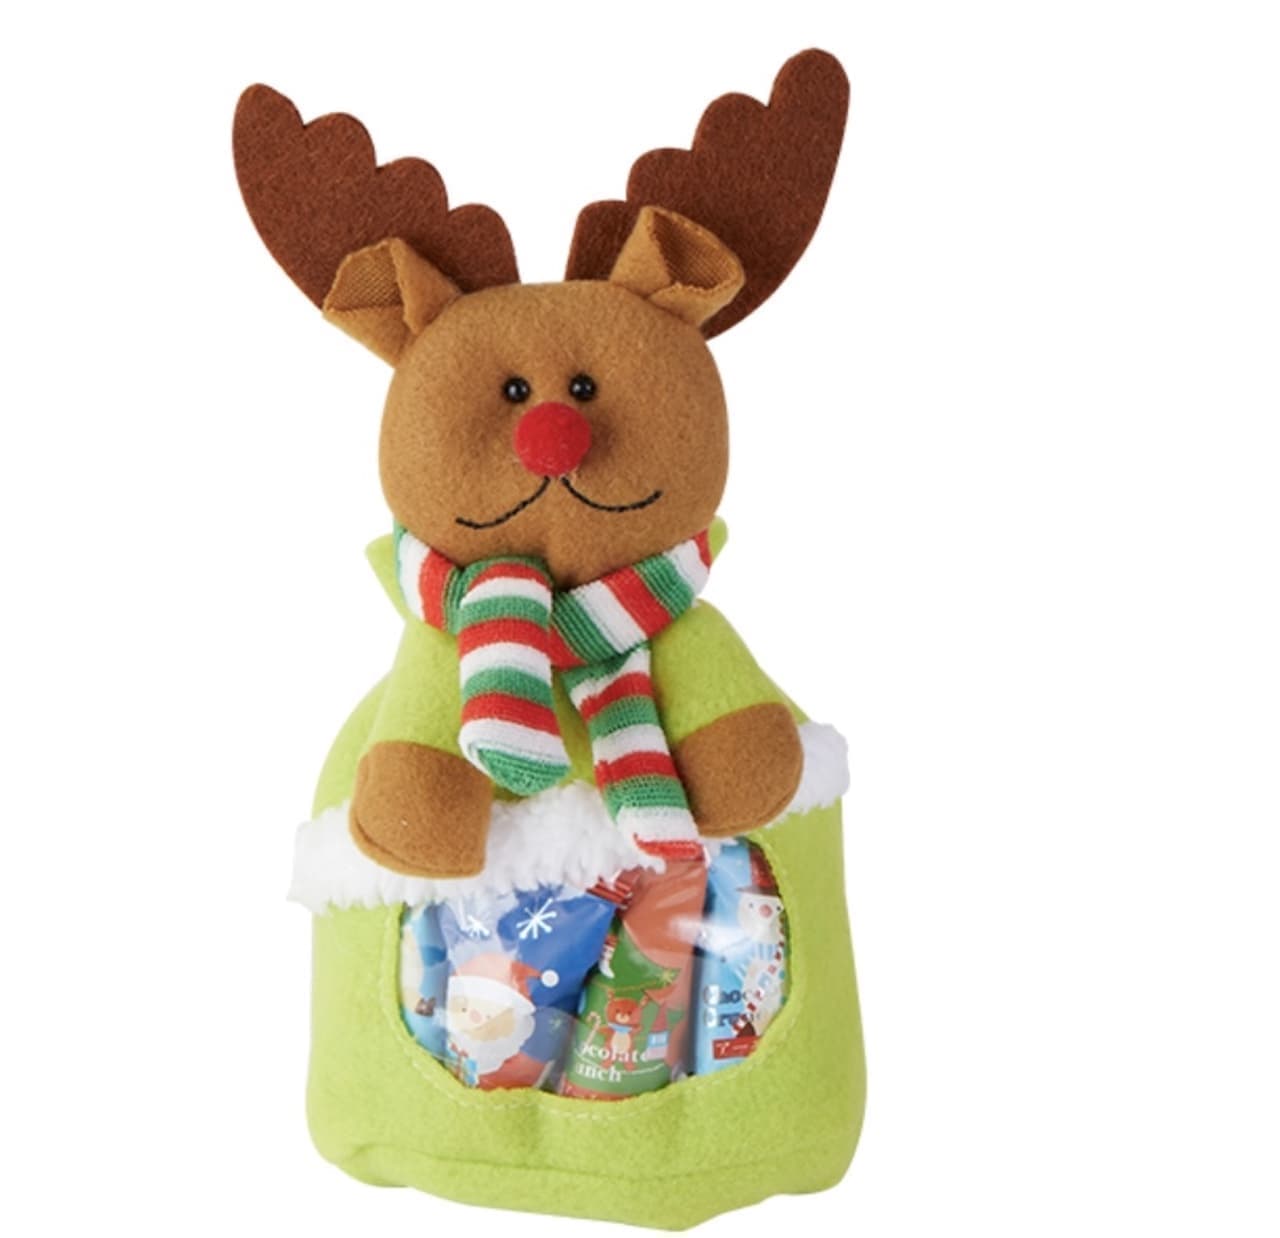 Chateraise "Christmas Sweets Doll Reindeer